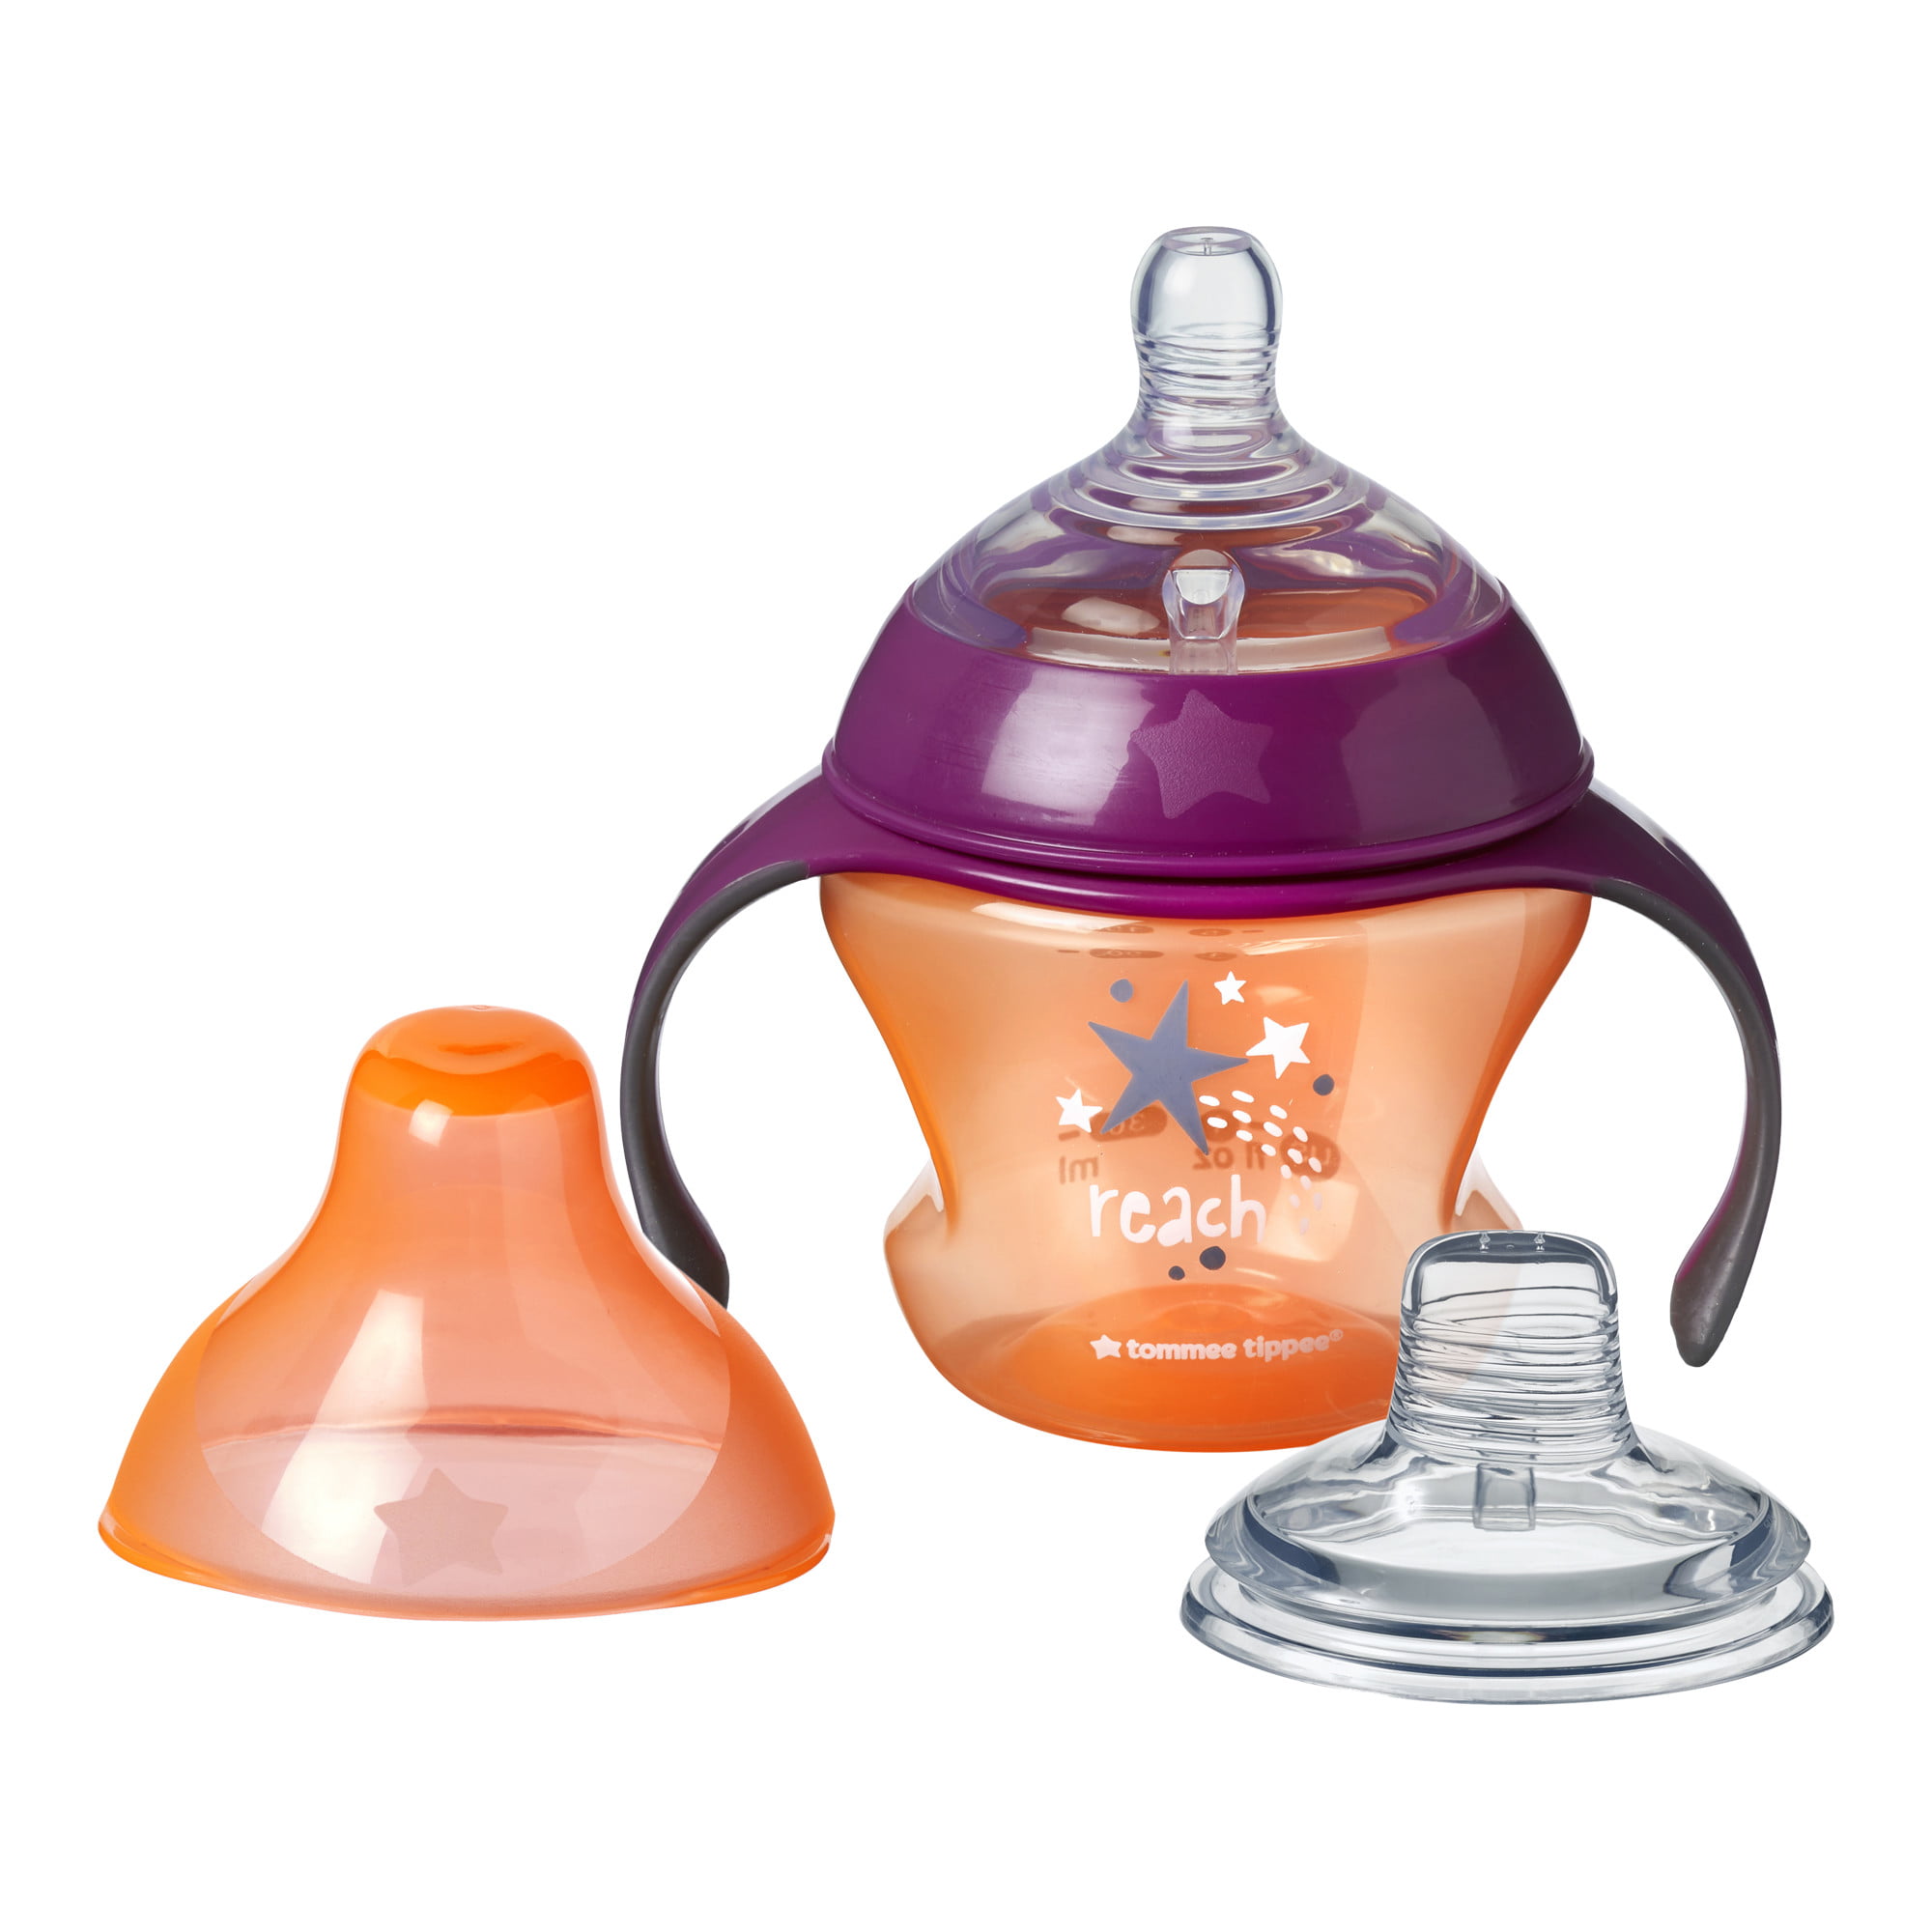 Is my Tommee Tippee sippy cup safe? - My Spreadsheet Brain